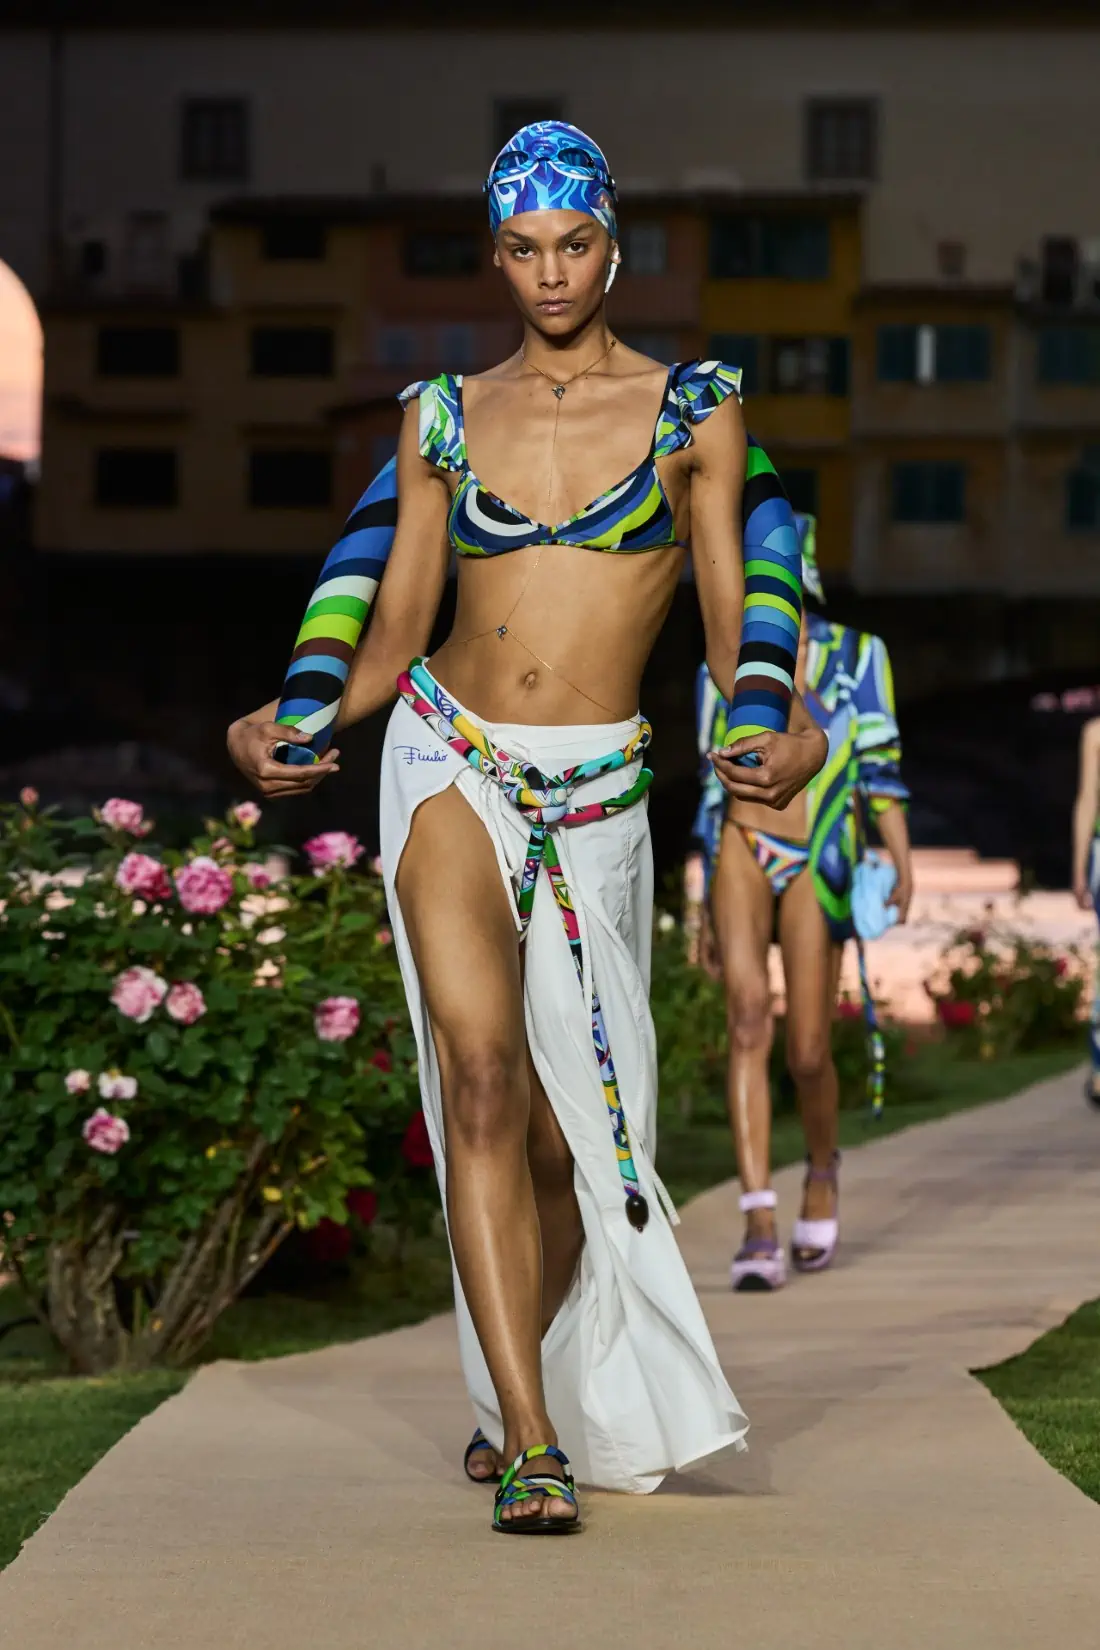 Pucci swimsuits